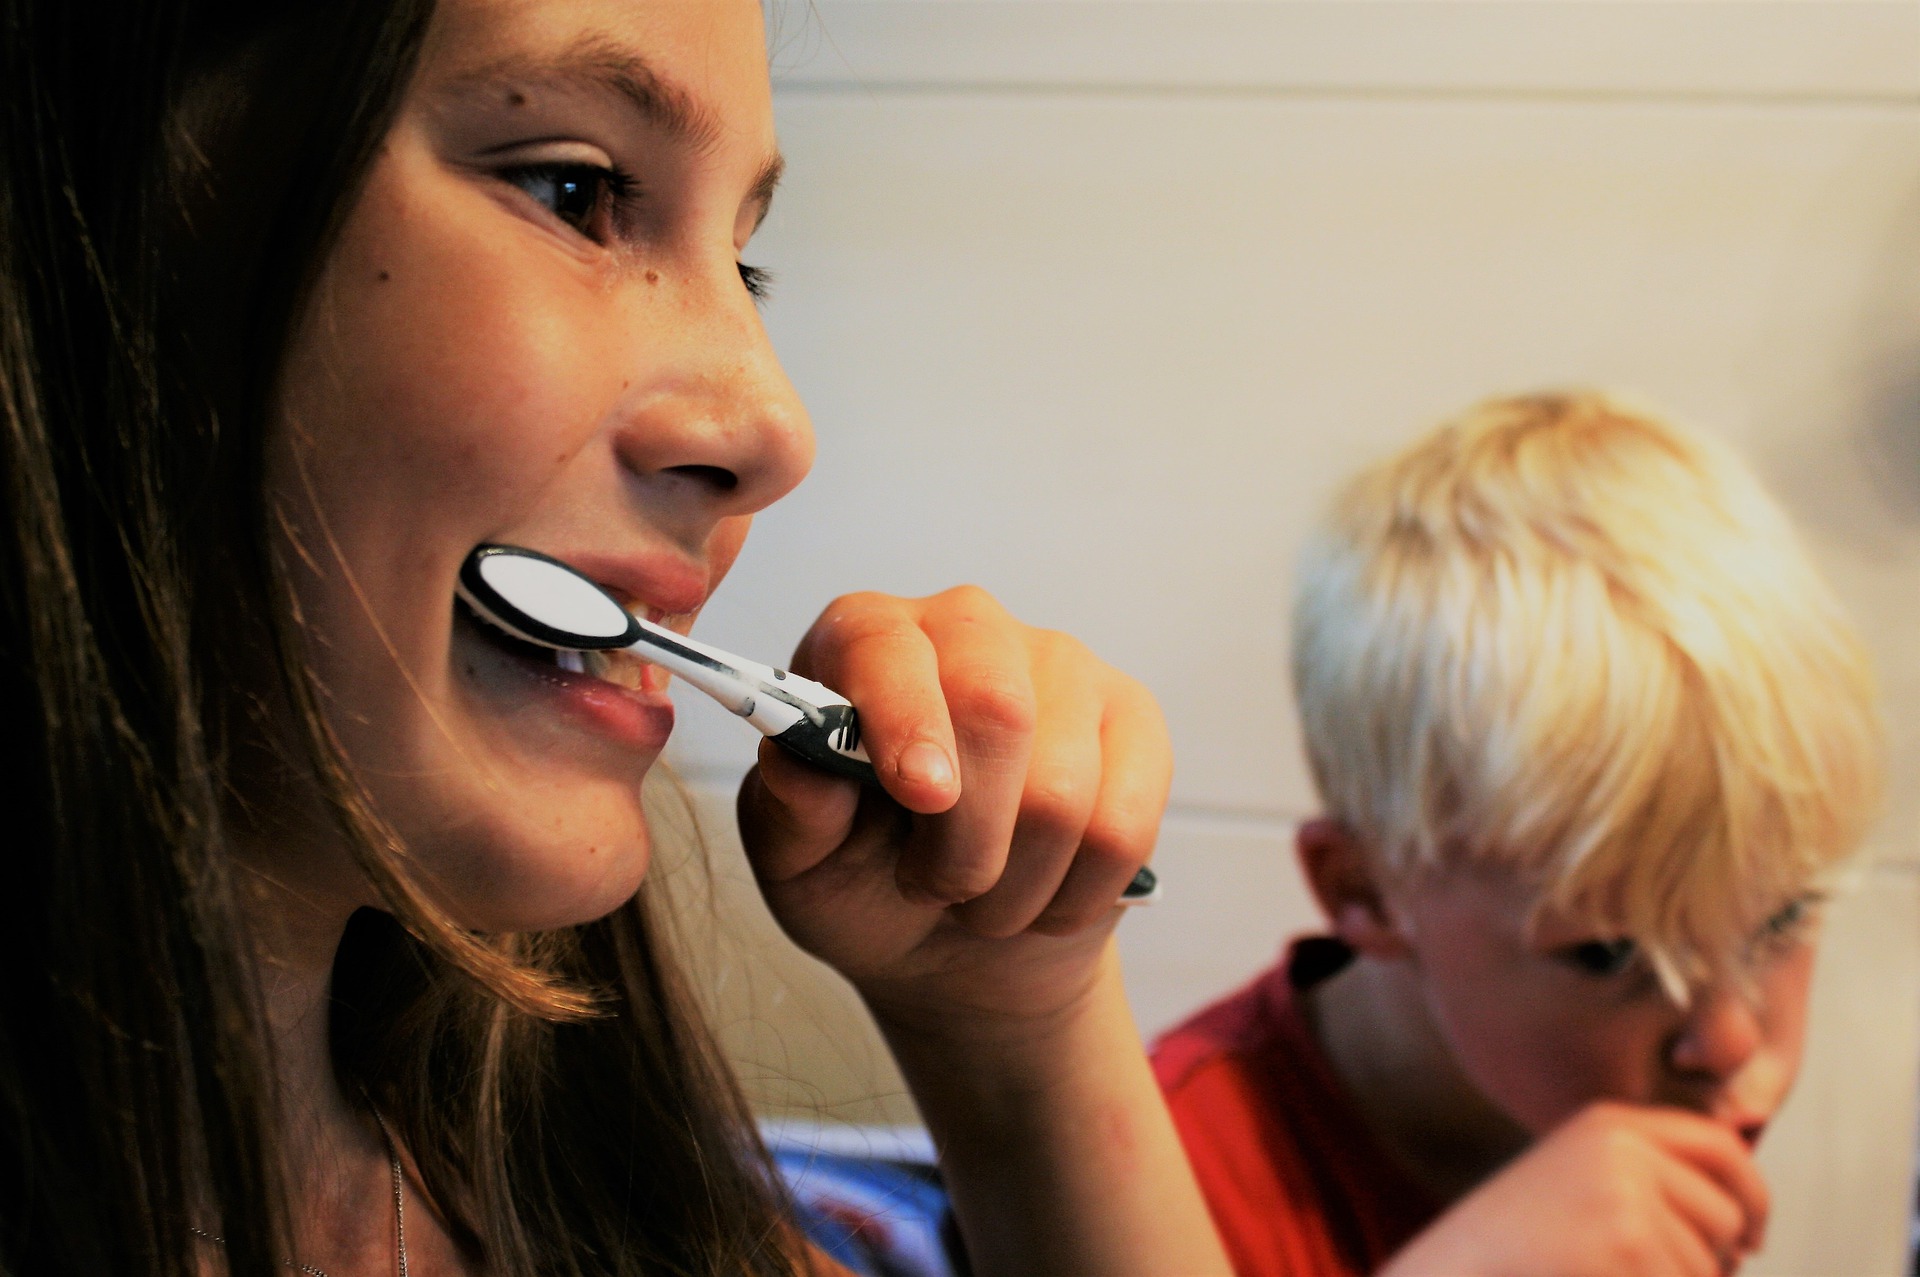 Brush your teeth before or after breakfast: Which is right?